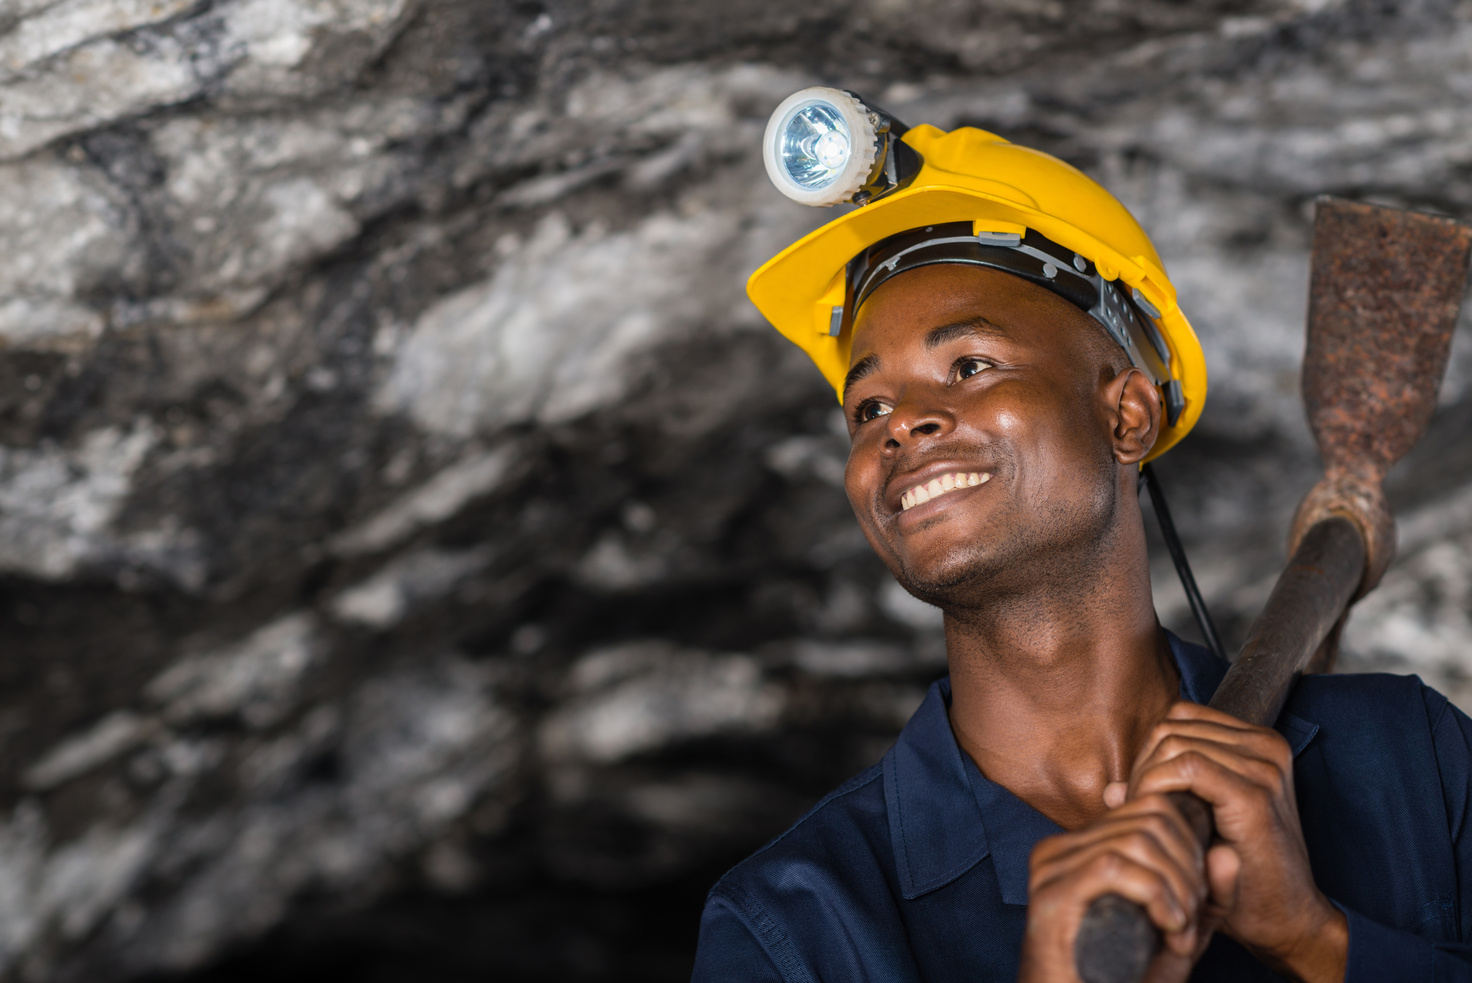 Happy worker at a mine